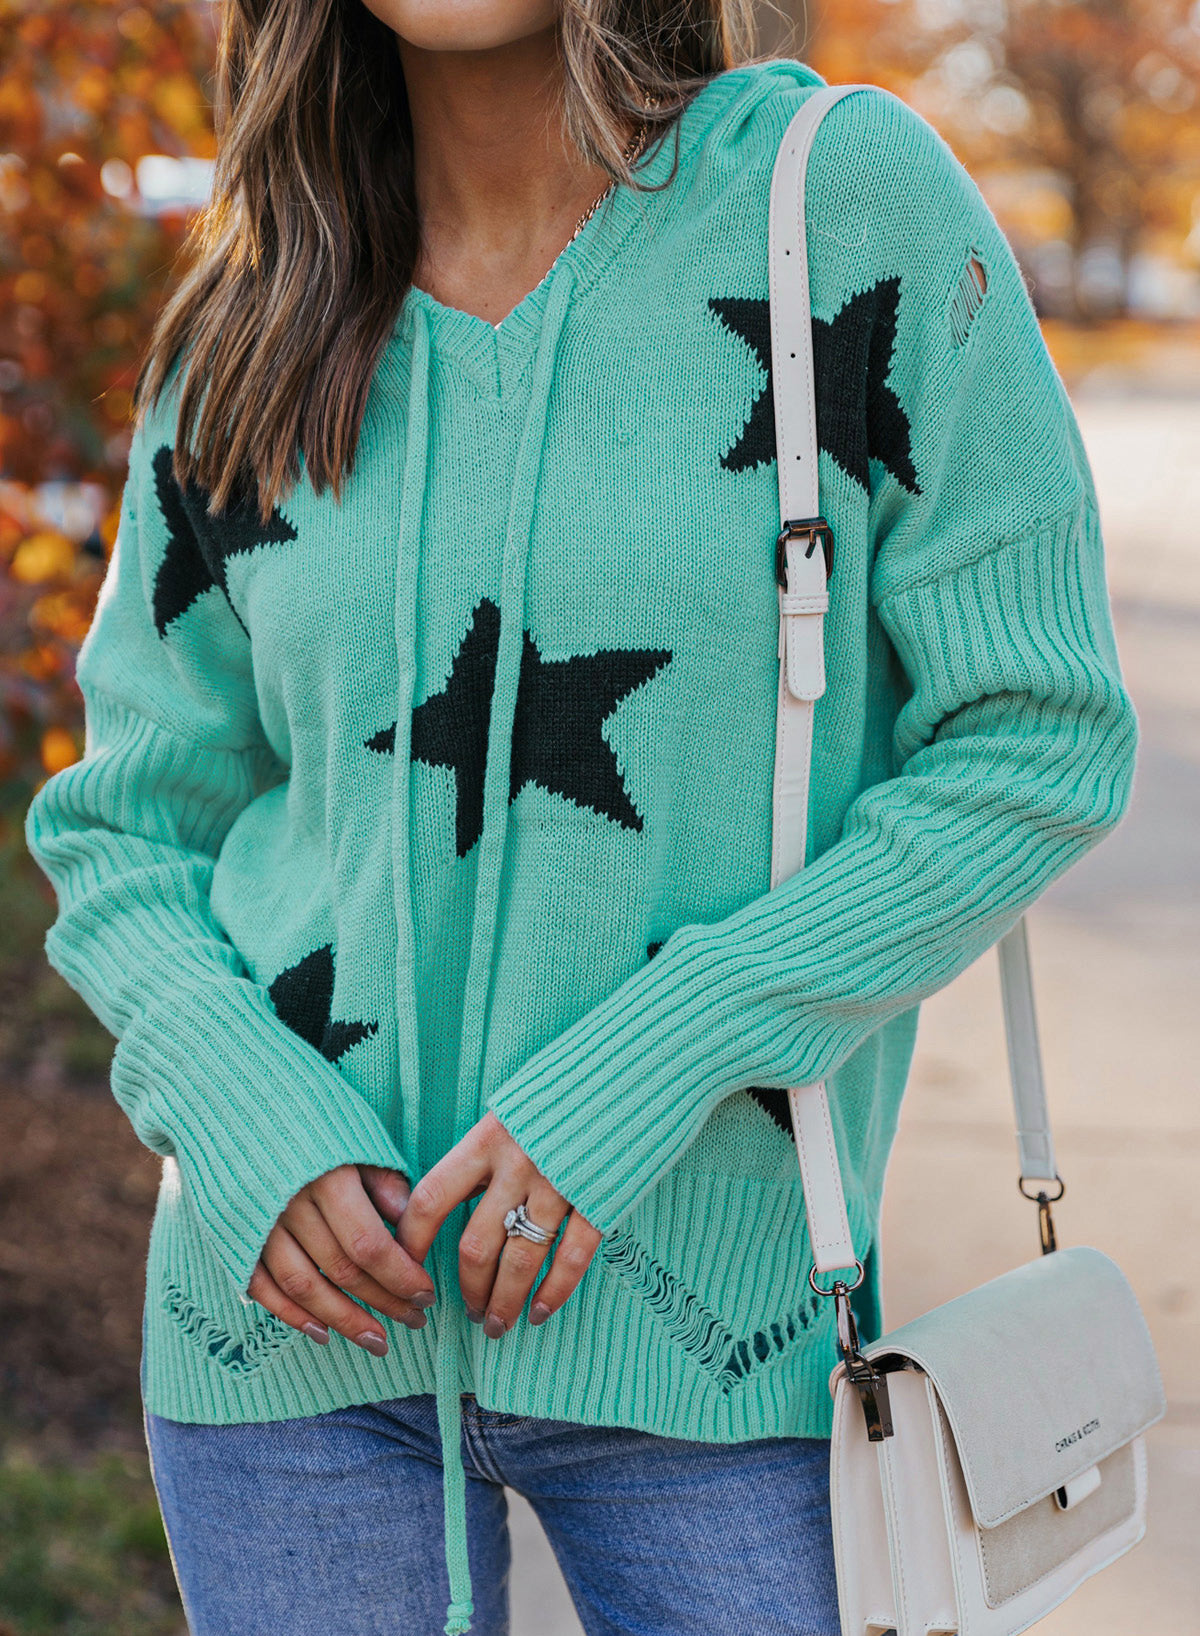 Star Distressed Hooded Sweater